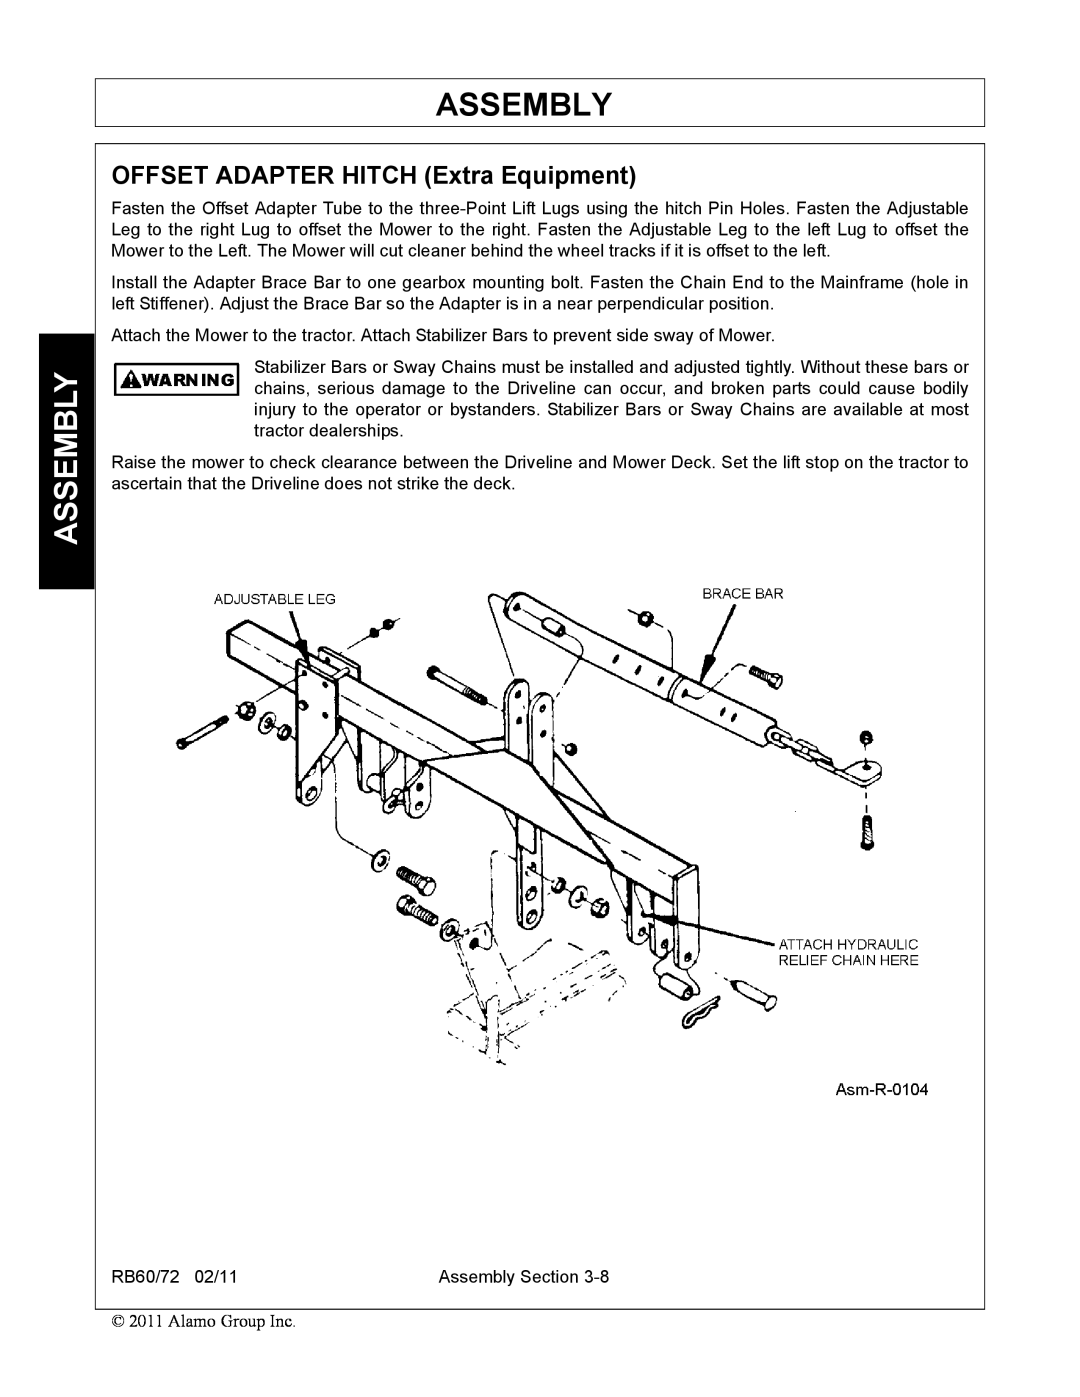 Blue Rhino RB60/72 manual OFFSET ADAPTER HITCH Extra Equipment, Assembly 